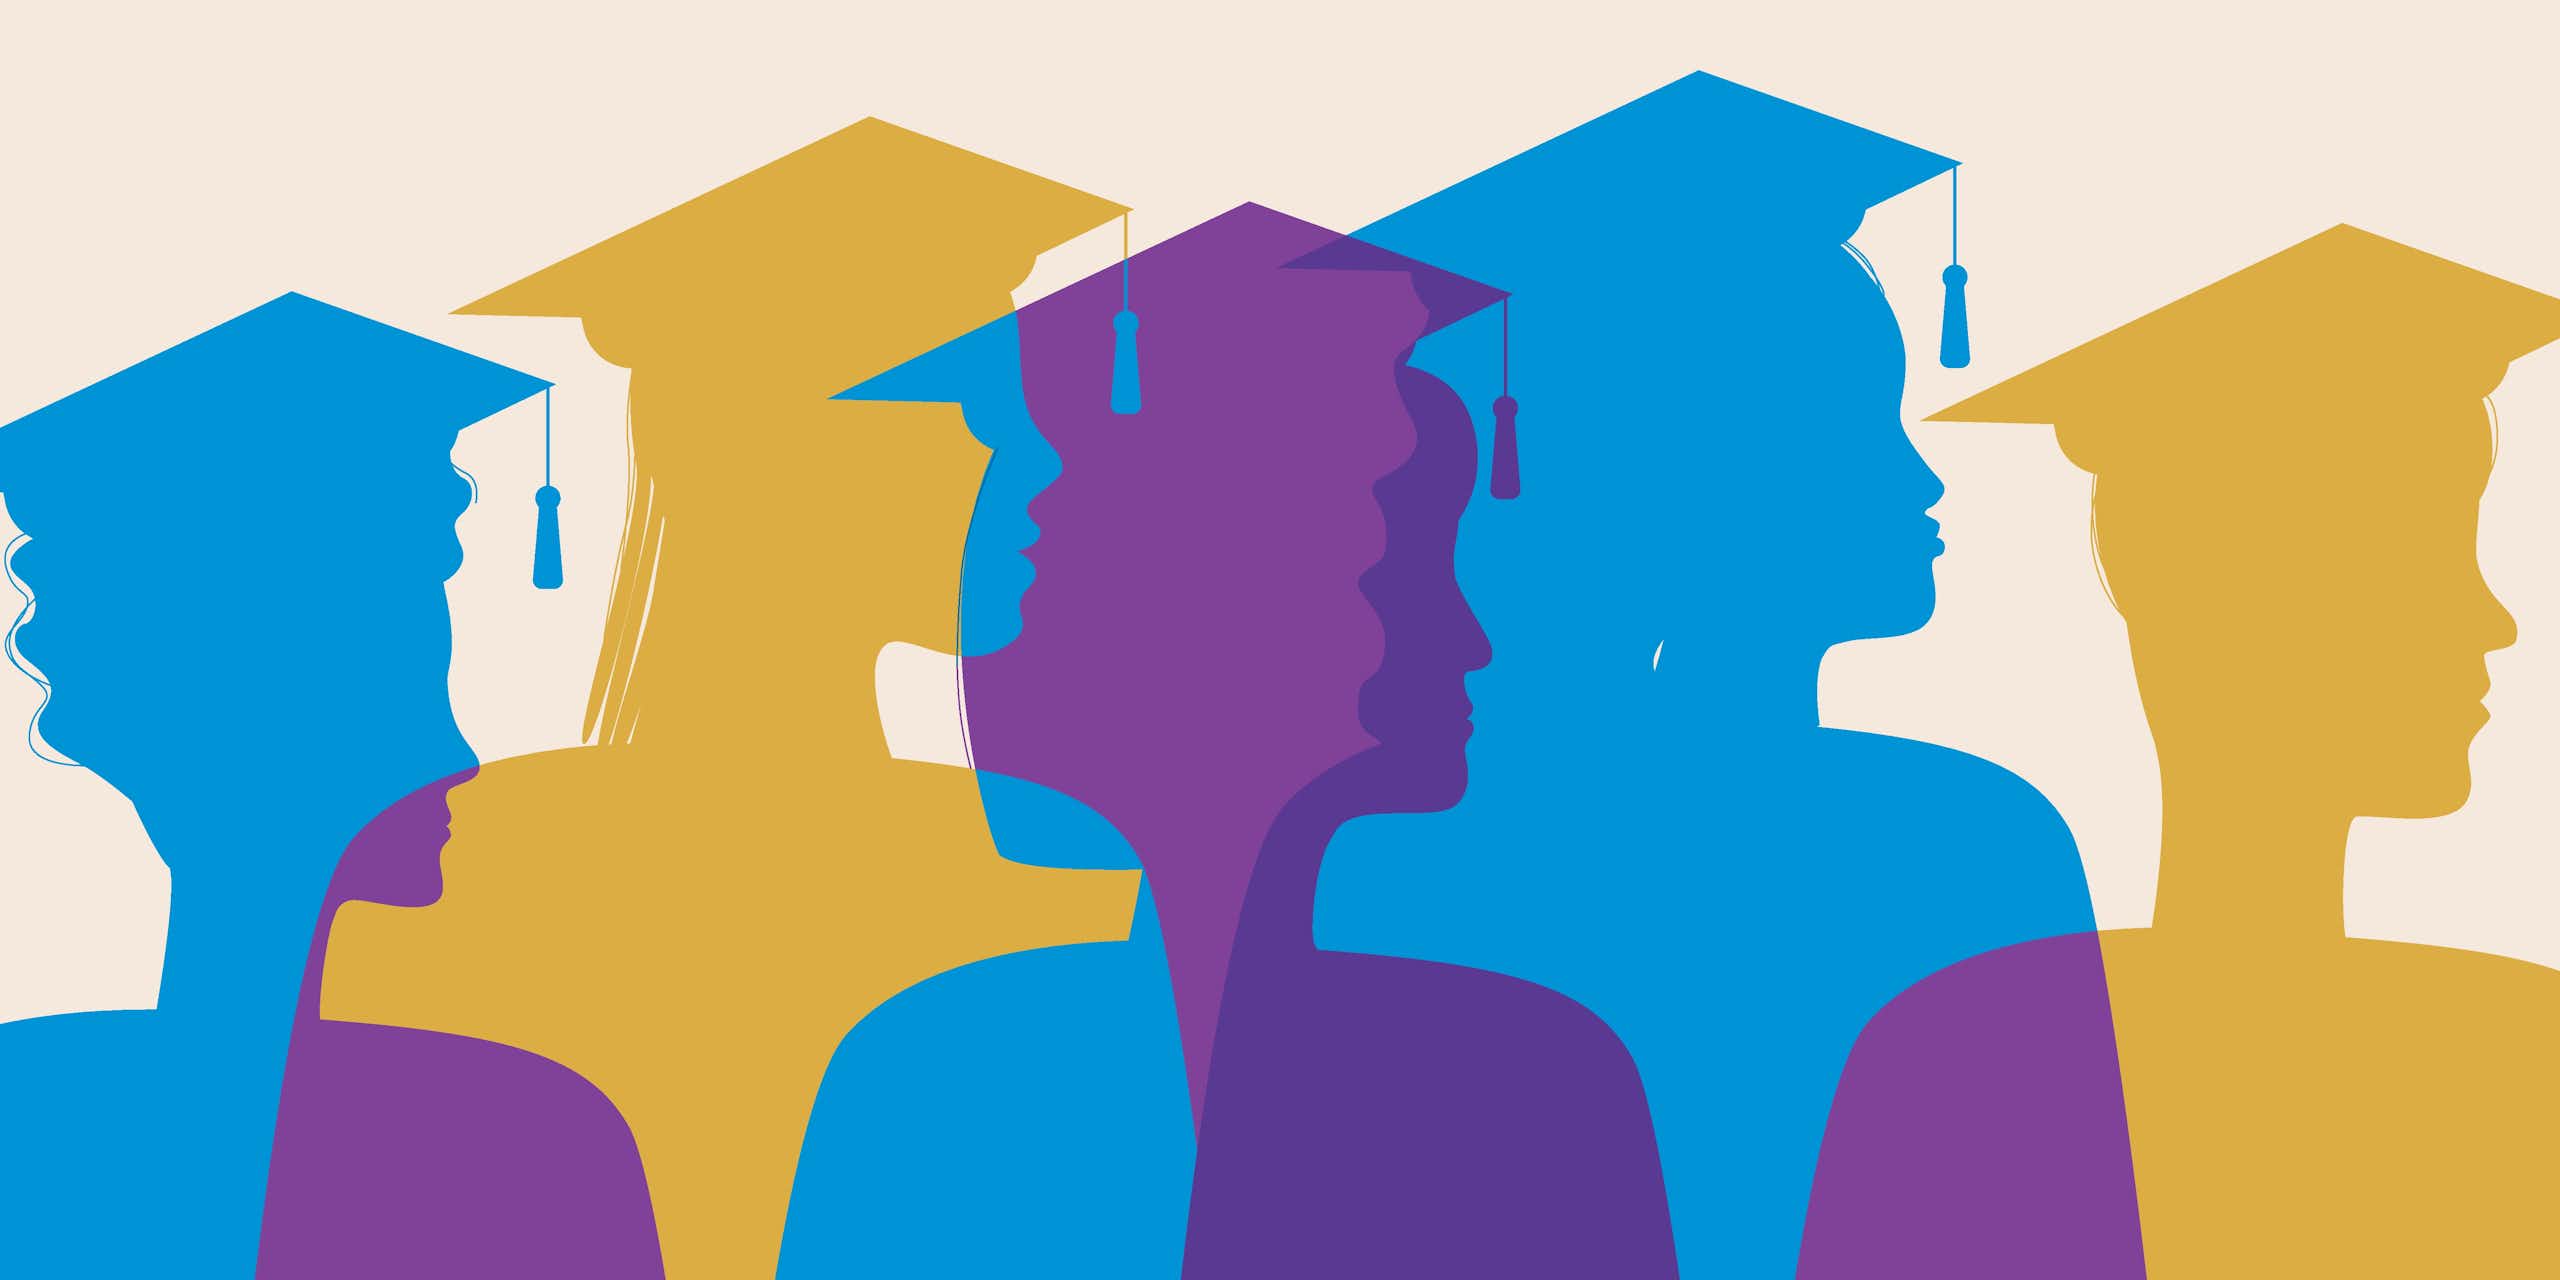 Purple, blue and gold silhouettes of people wearing graduation caps with tassels.